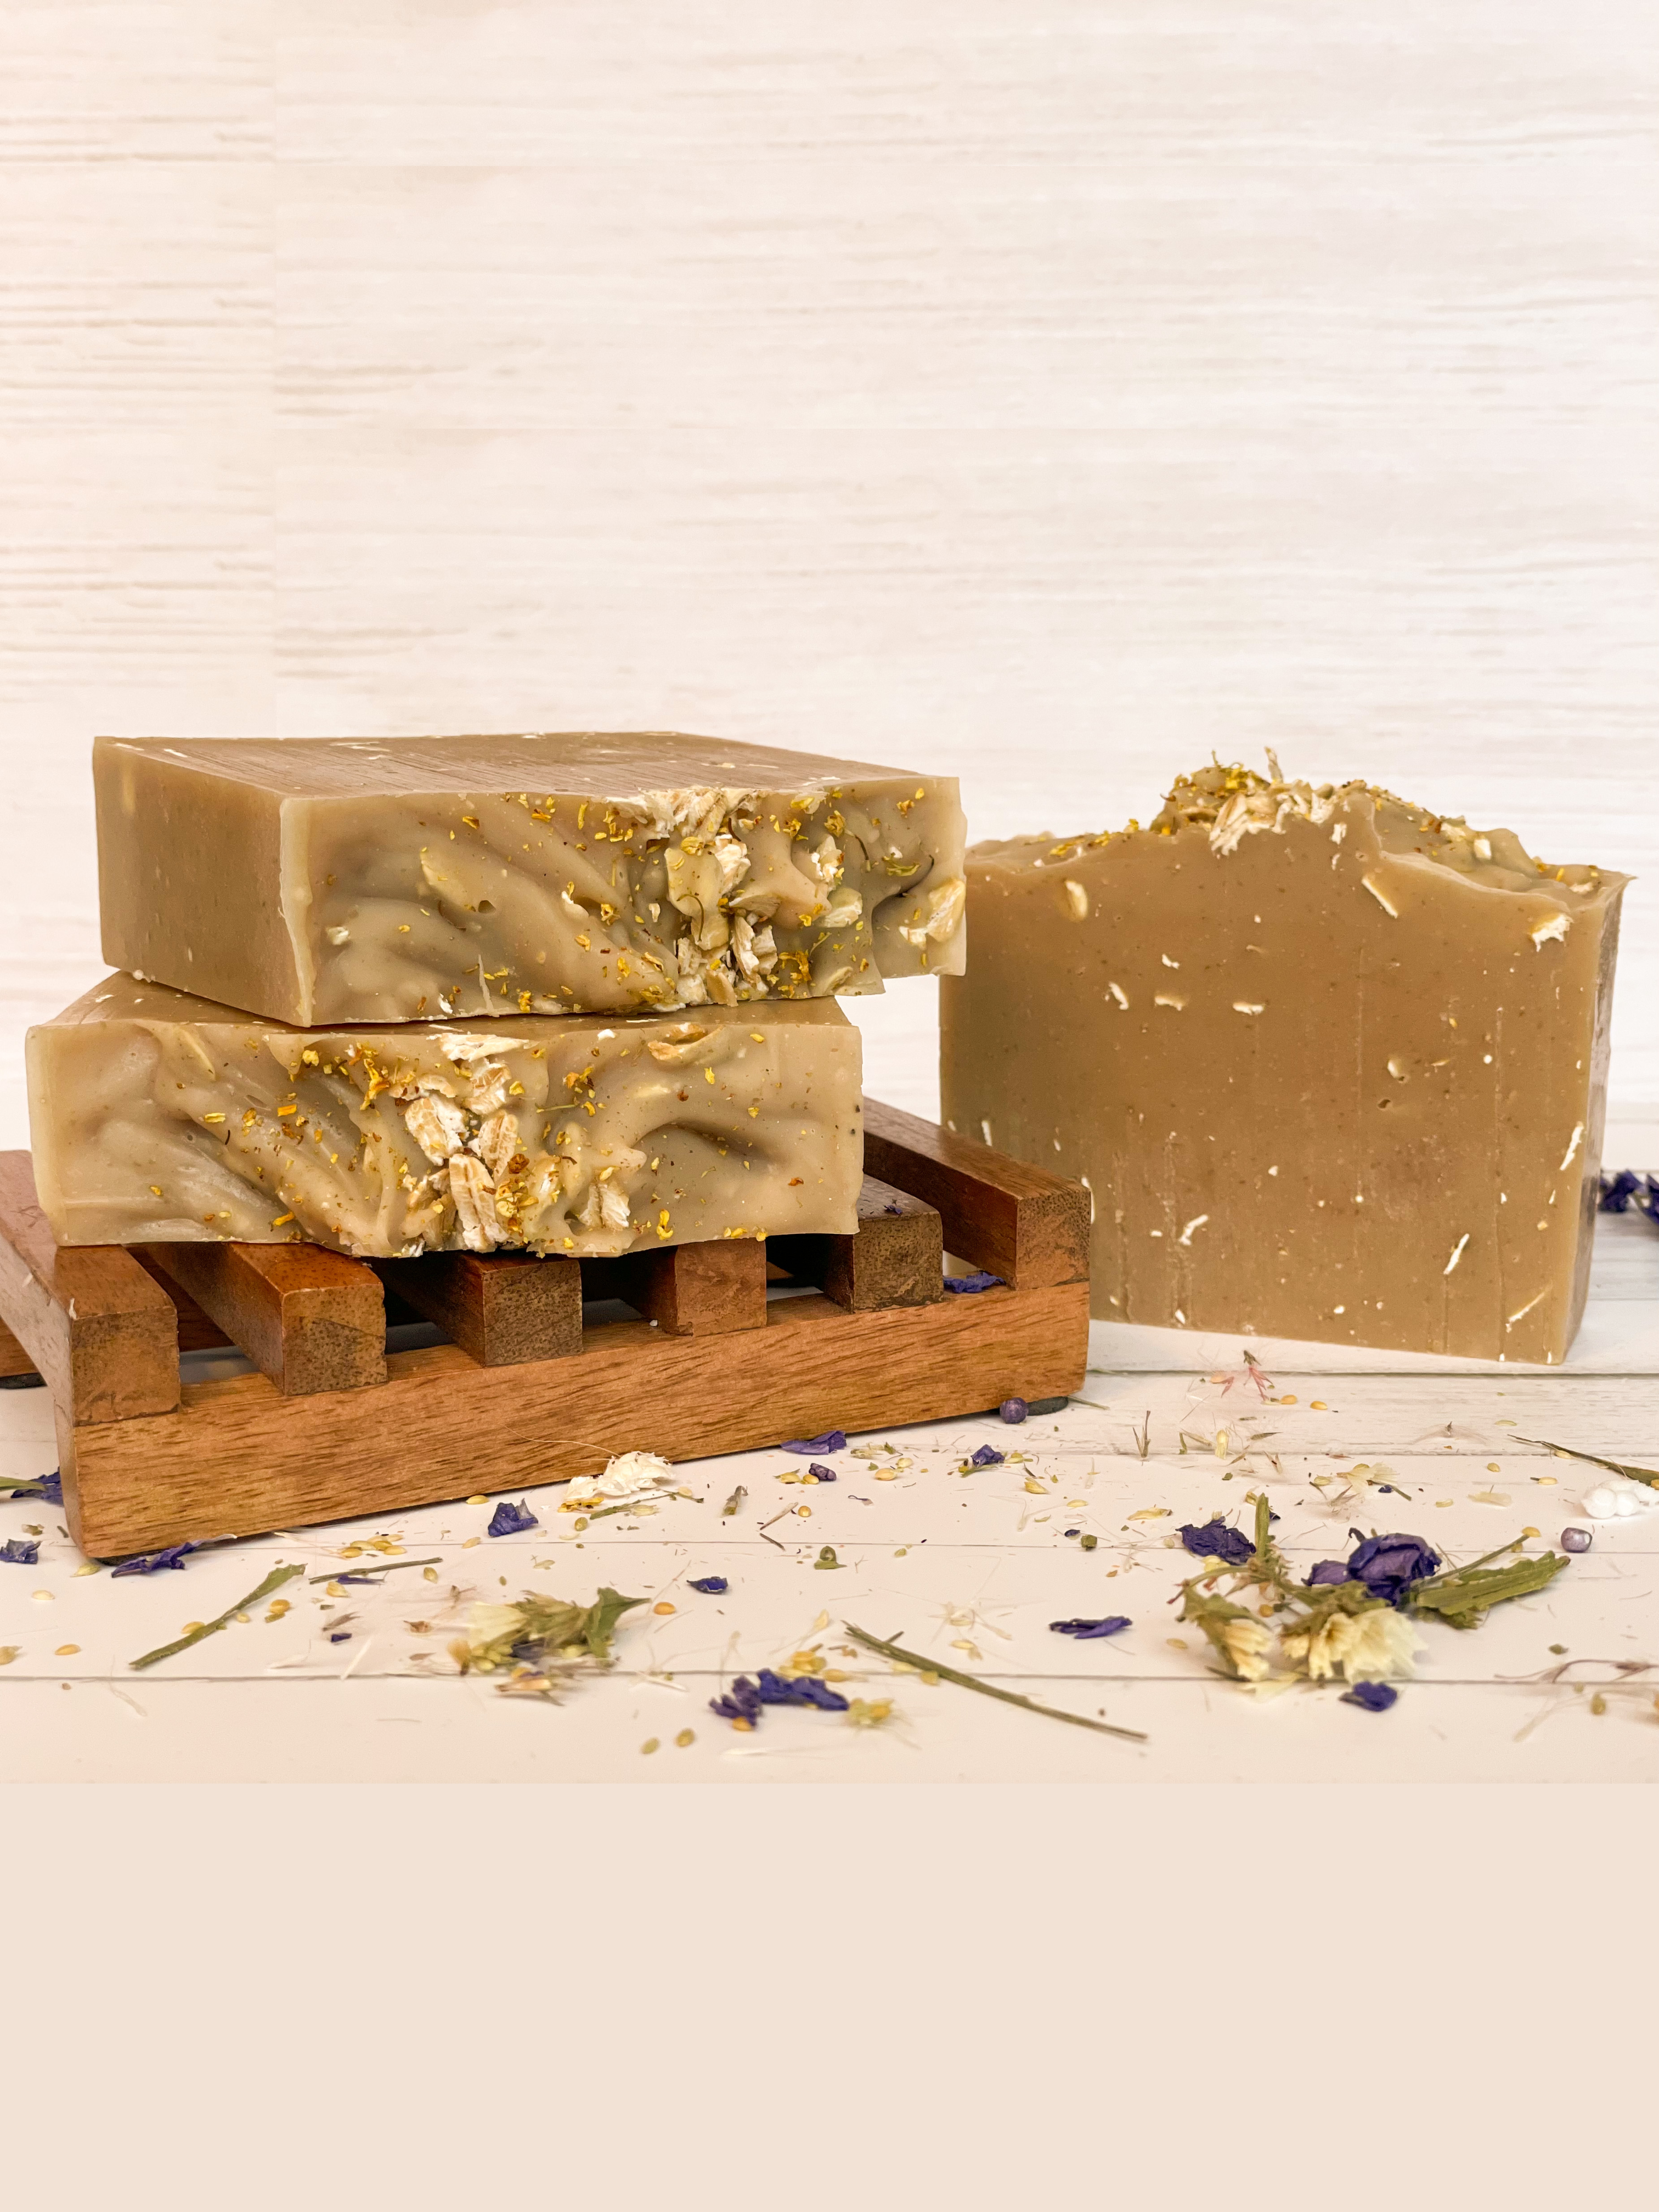 Salo Soap's - Goat Milk Soap for Eczema Delightfully Unscented Bar Soap,  Goat Soap Made with Goat Milk, All Natural Bar Soap With Ground Oatmeal for